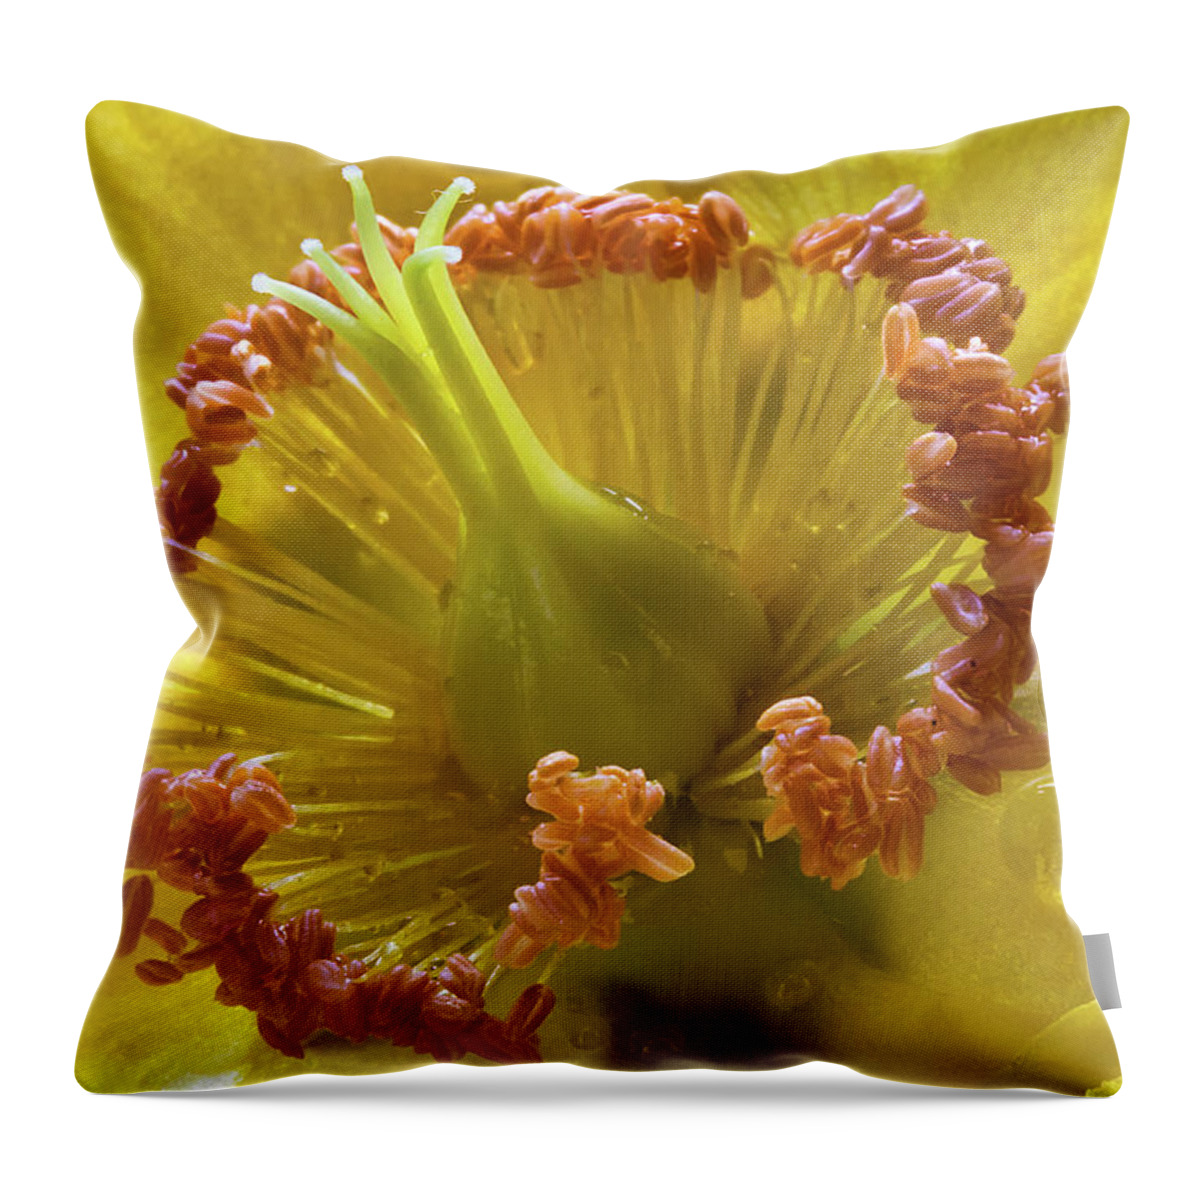 Wort Throw Pillow featuring the photograph St Johns Wort Flower Centre by Shirley Mitchell